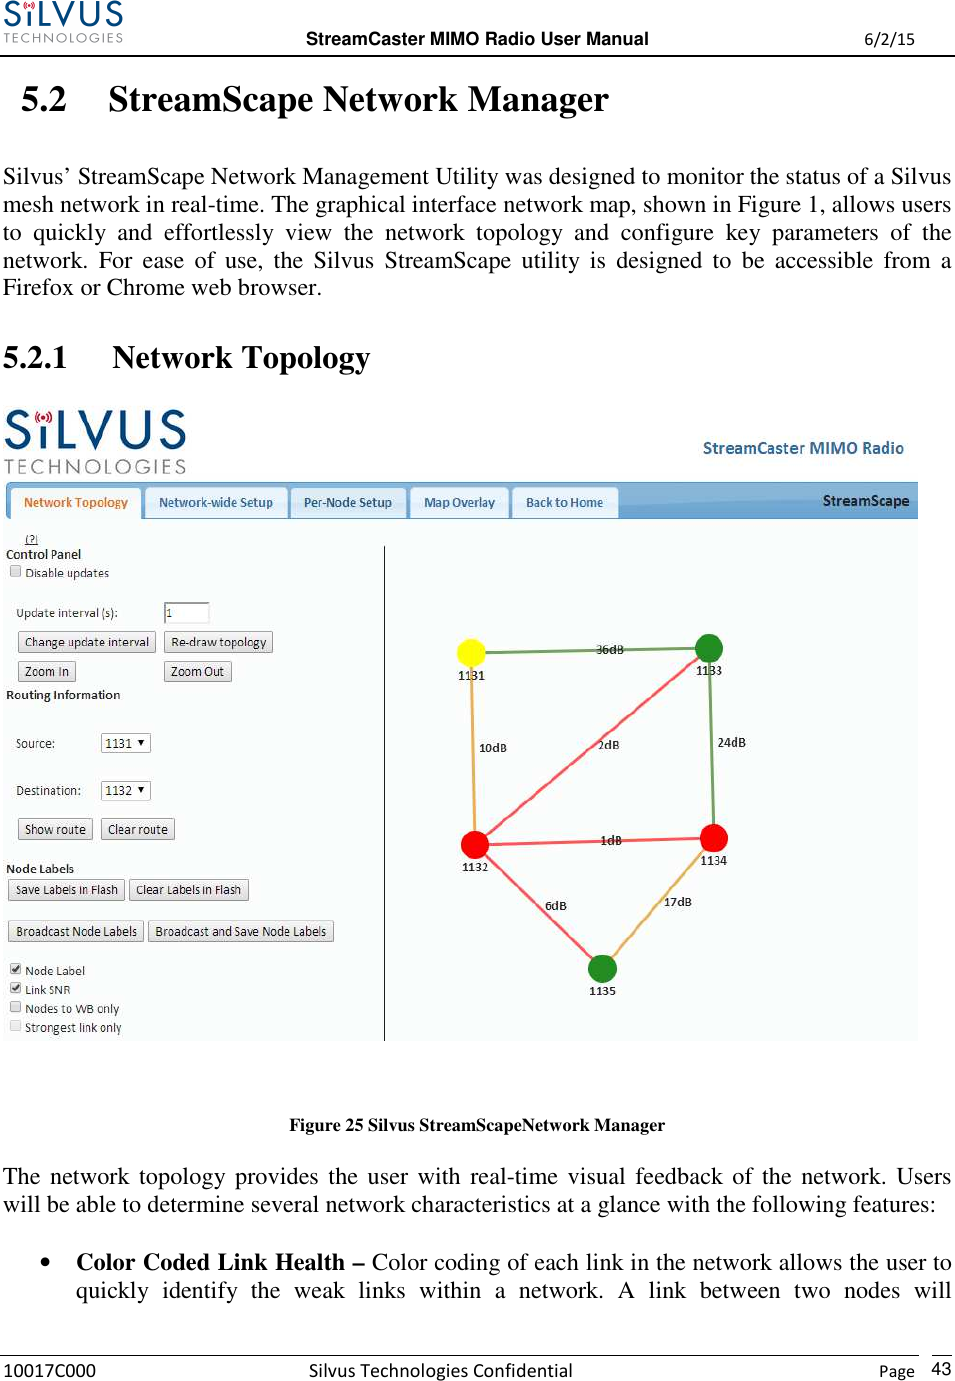  StreamCaster MIMO Radio User Manual  6/2/15 10017C000 Silvus Technologies Confidential    Page   43 5.2 StreamScape Network Manager  Silvus’ StreamScape Network Management Utility was designed to monitor the status of a Silvus mesh network in real-time. The graphical interface network map, shown in Figure 1, allows users to  quickly  and  effortlessly  view  the  network  topology  and  configure  key  parameters  of  the network.  For  ease  of  use,  the  Silvus  StreamScape  utility  is  designed  to  be  accessible  from  a Firefox or Chrome web browser.  5.2.1 Network Topology   Figure 25 Silvus StreamScapeNetwork Manager The network topology provides the user with real-time visual feedback of  the  network. Users will be able to determine several network characteristics at a glance with the following features:   • Color Coded Link Health – Color coding of each link in the network allows the user to quickly  identify  the  weak  links  within  a  network.  A  link  between  two  nodes  will 